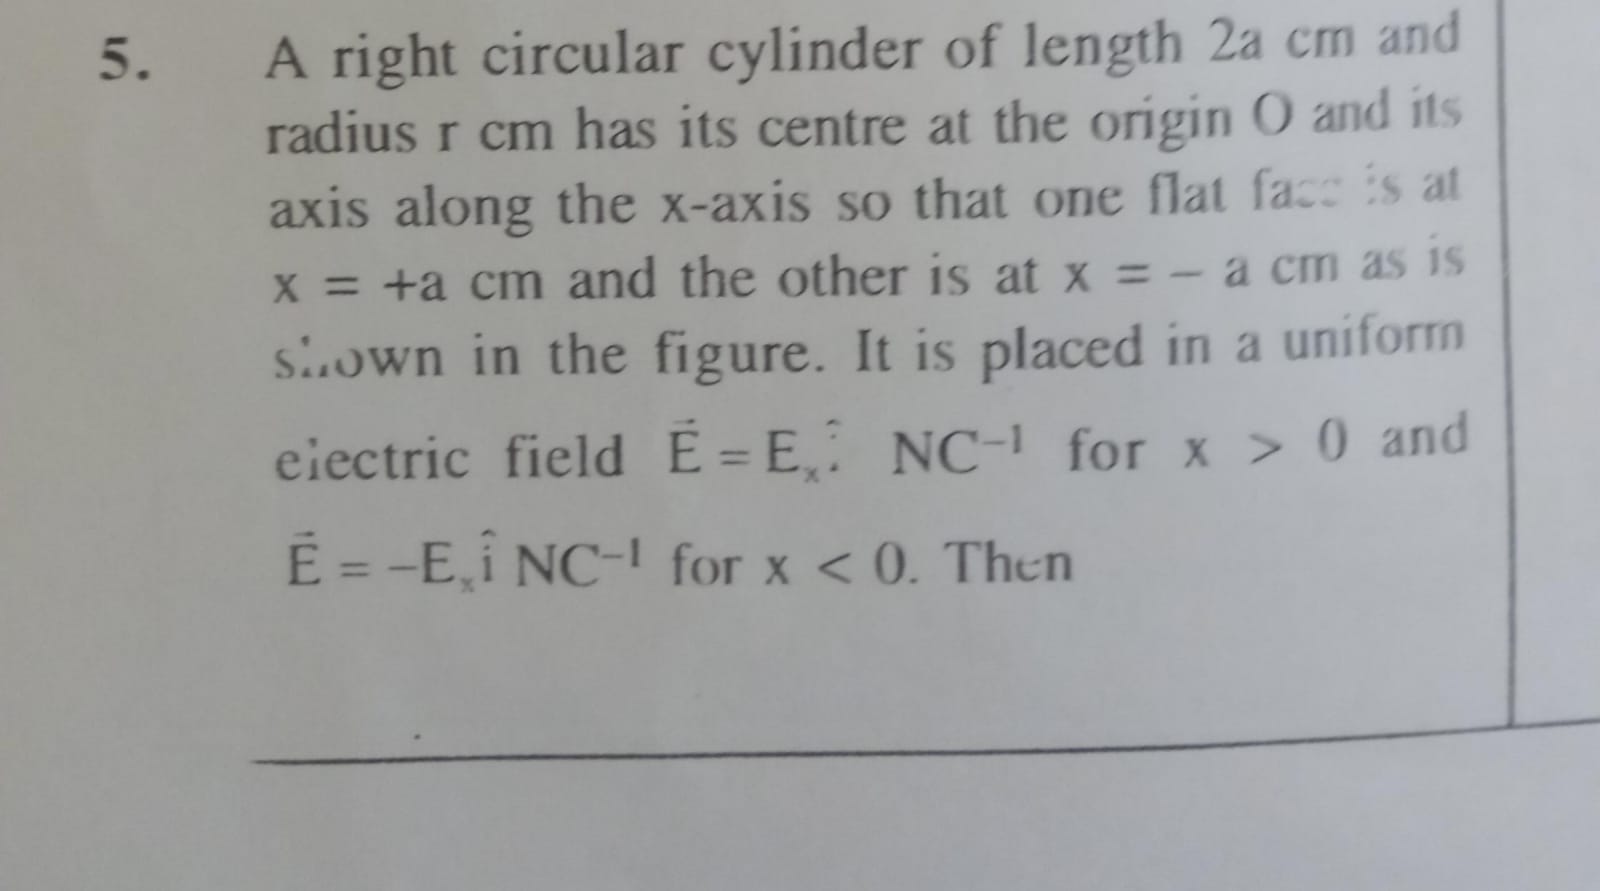 5. A right circular cylinder of length 2a cm and radius rcm has its ce